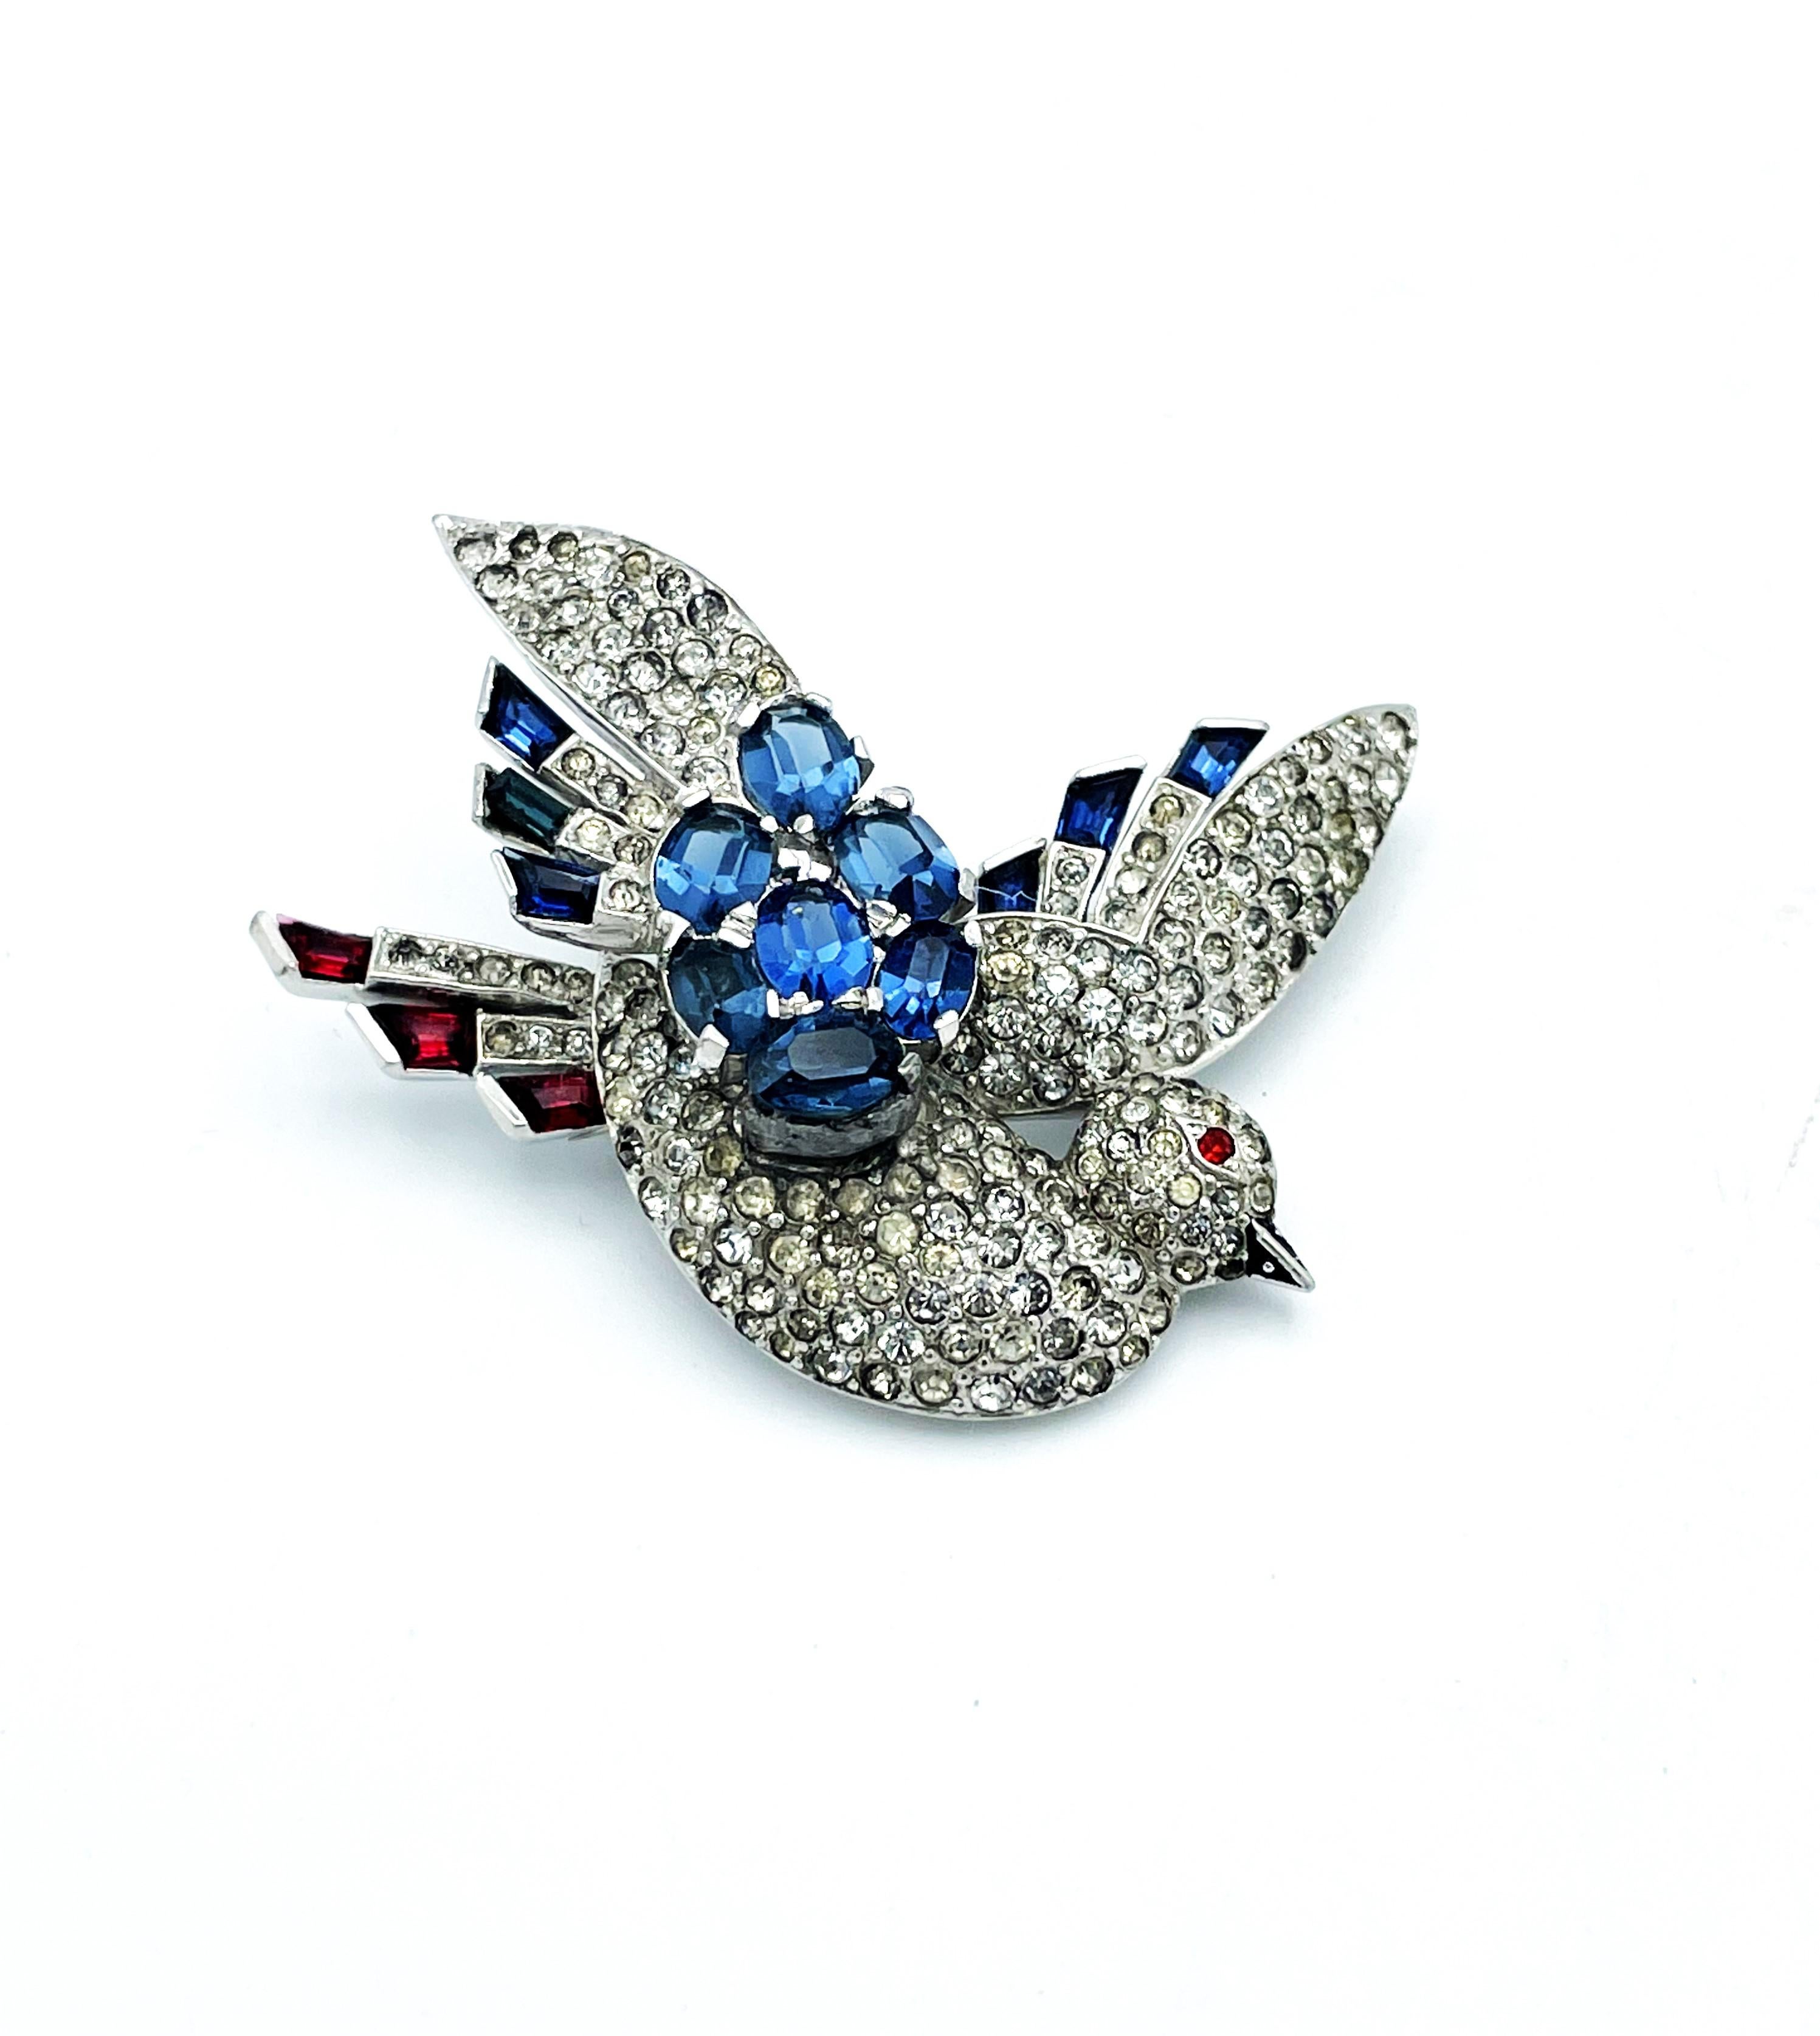 About
Flying Bird brooch in the american color. Pale and dark Sapphiere and ruby trapezoid stones.
Measurement
Size 2